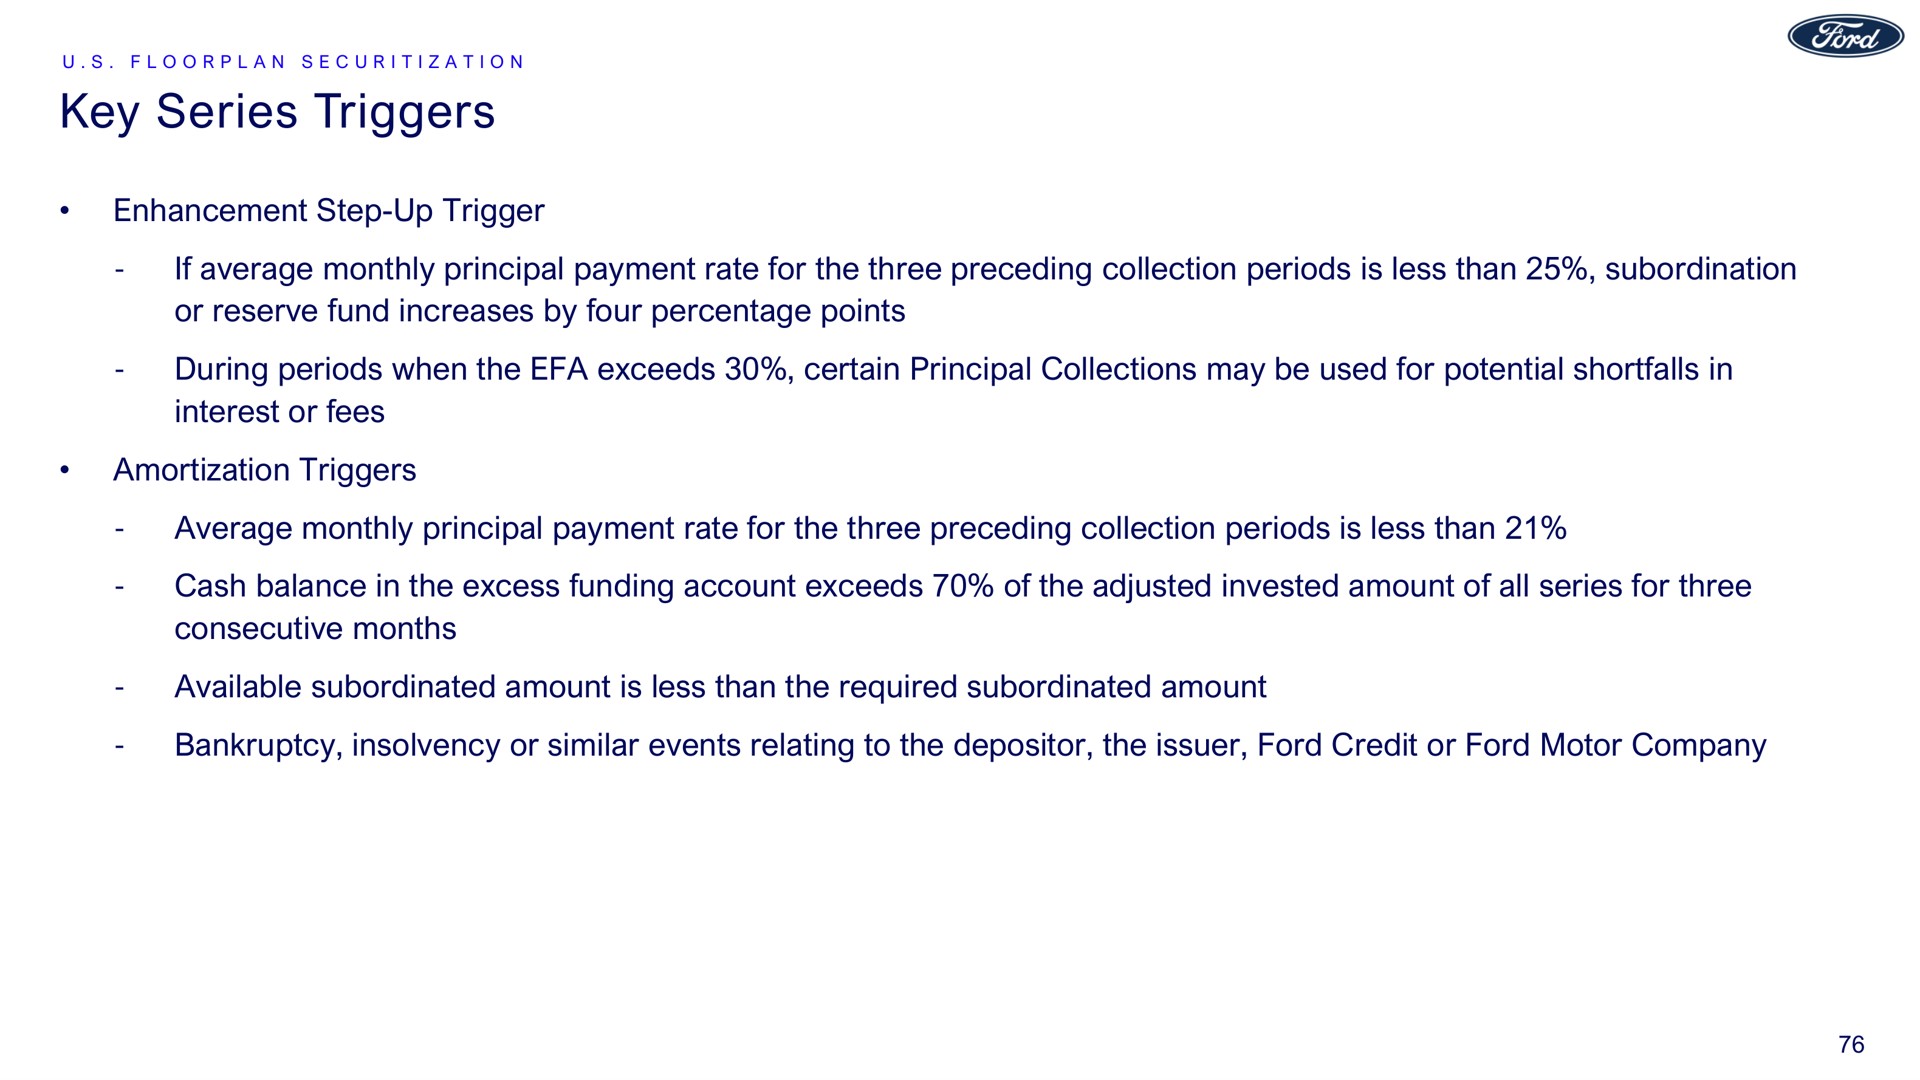 key series triggers enhancement step up trigger if average monthly principal payment rate for the three preceding collection periods is less than subordination or reserve fund increases by four percentage points during periods when the exceeds certain principal collections may be used for potential shortfalls in interest or fees amortization triggers average monthly principal payment rate for the three preceding collection periods is less than cash balance in the excess funding account exceeds of the adjusted invested amount of all series for three consecutive months available subordinated amount is less than the required subordinated amount bankruptcy insolvency or similar events relating to the depositor the issuer ford credit or ford motor company | Ford